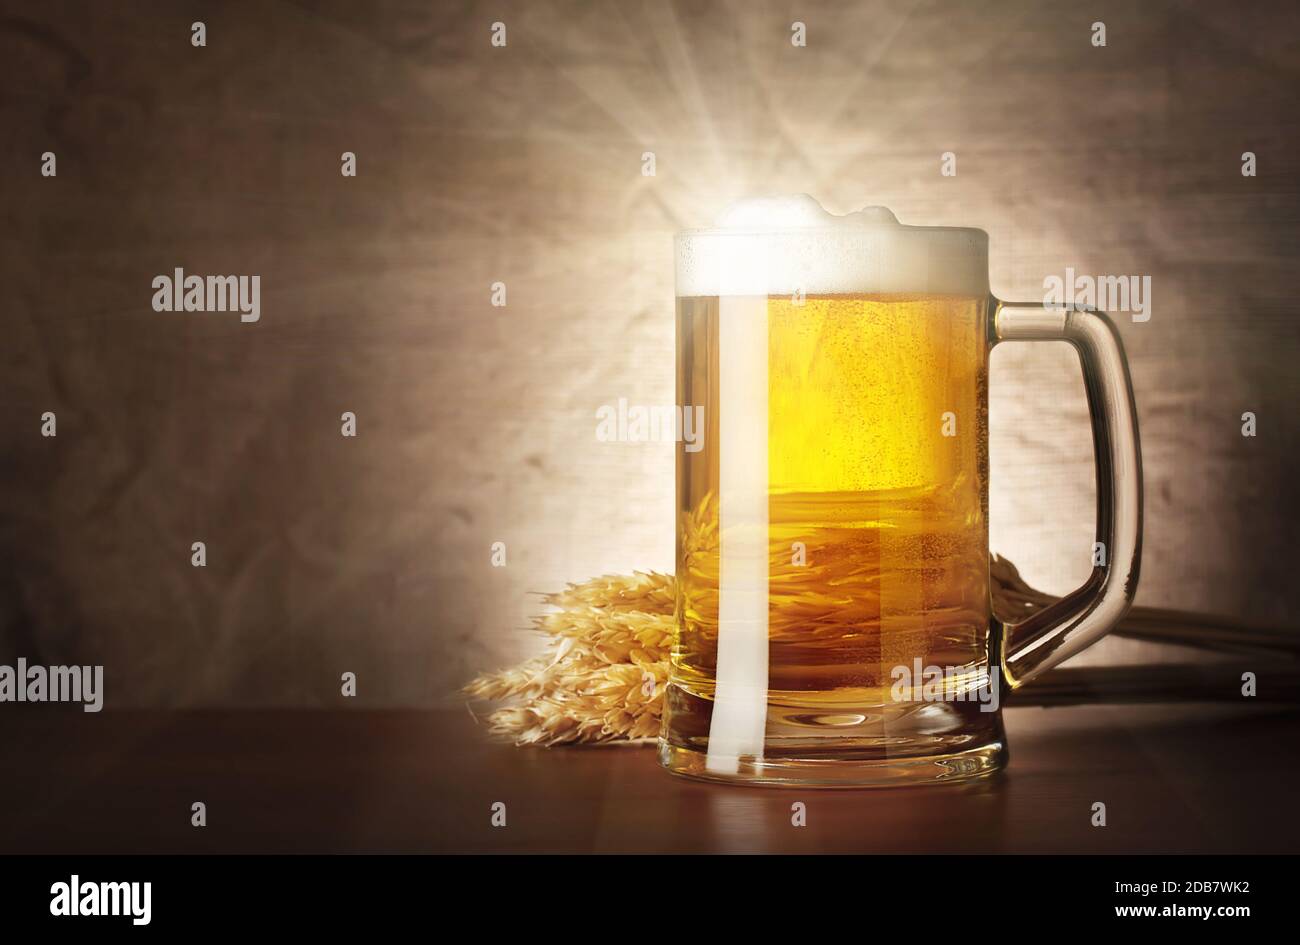 Mug of lager beer with a solar flare on burlap background Stock Photo